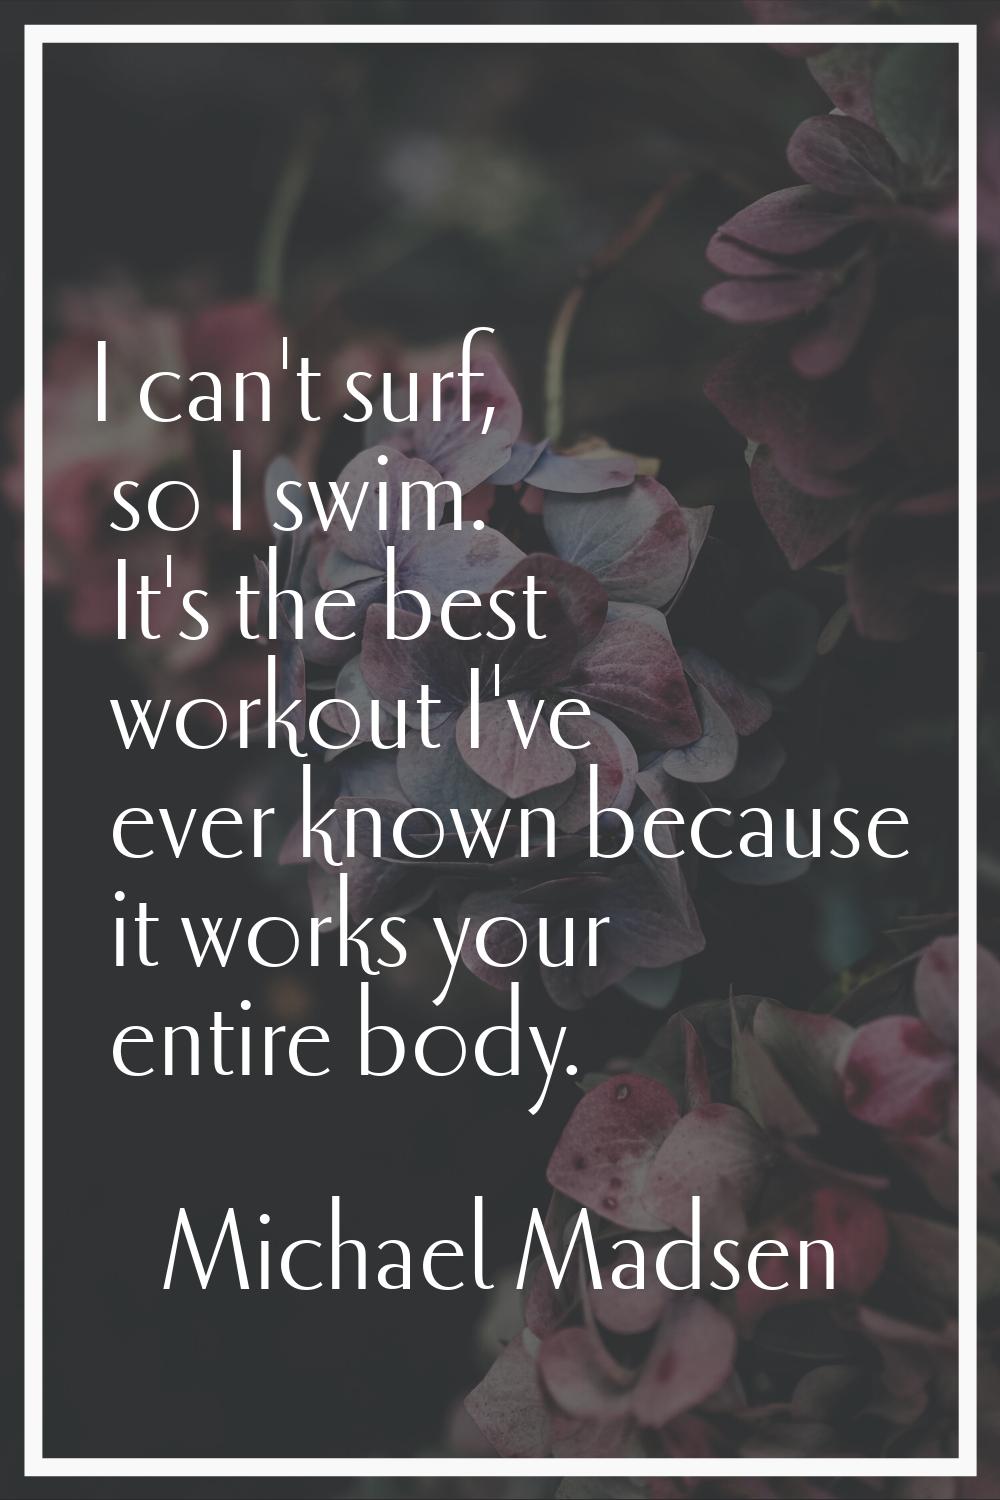 I can't surf, so I swim. It's the best workout I've ever known because it works your entire body.